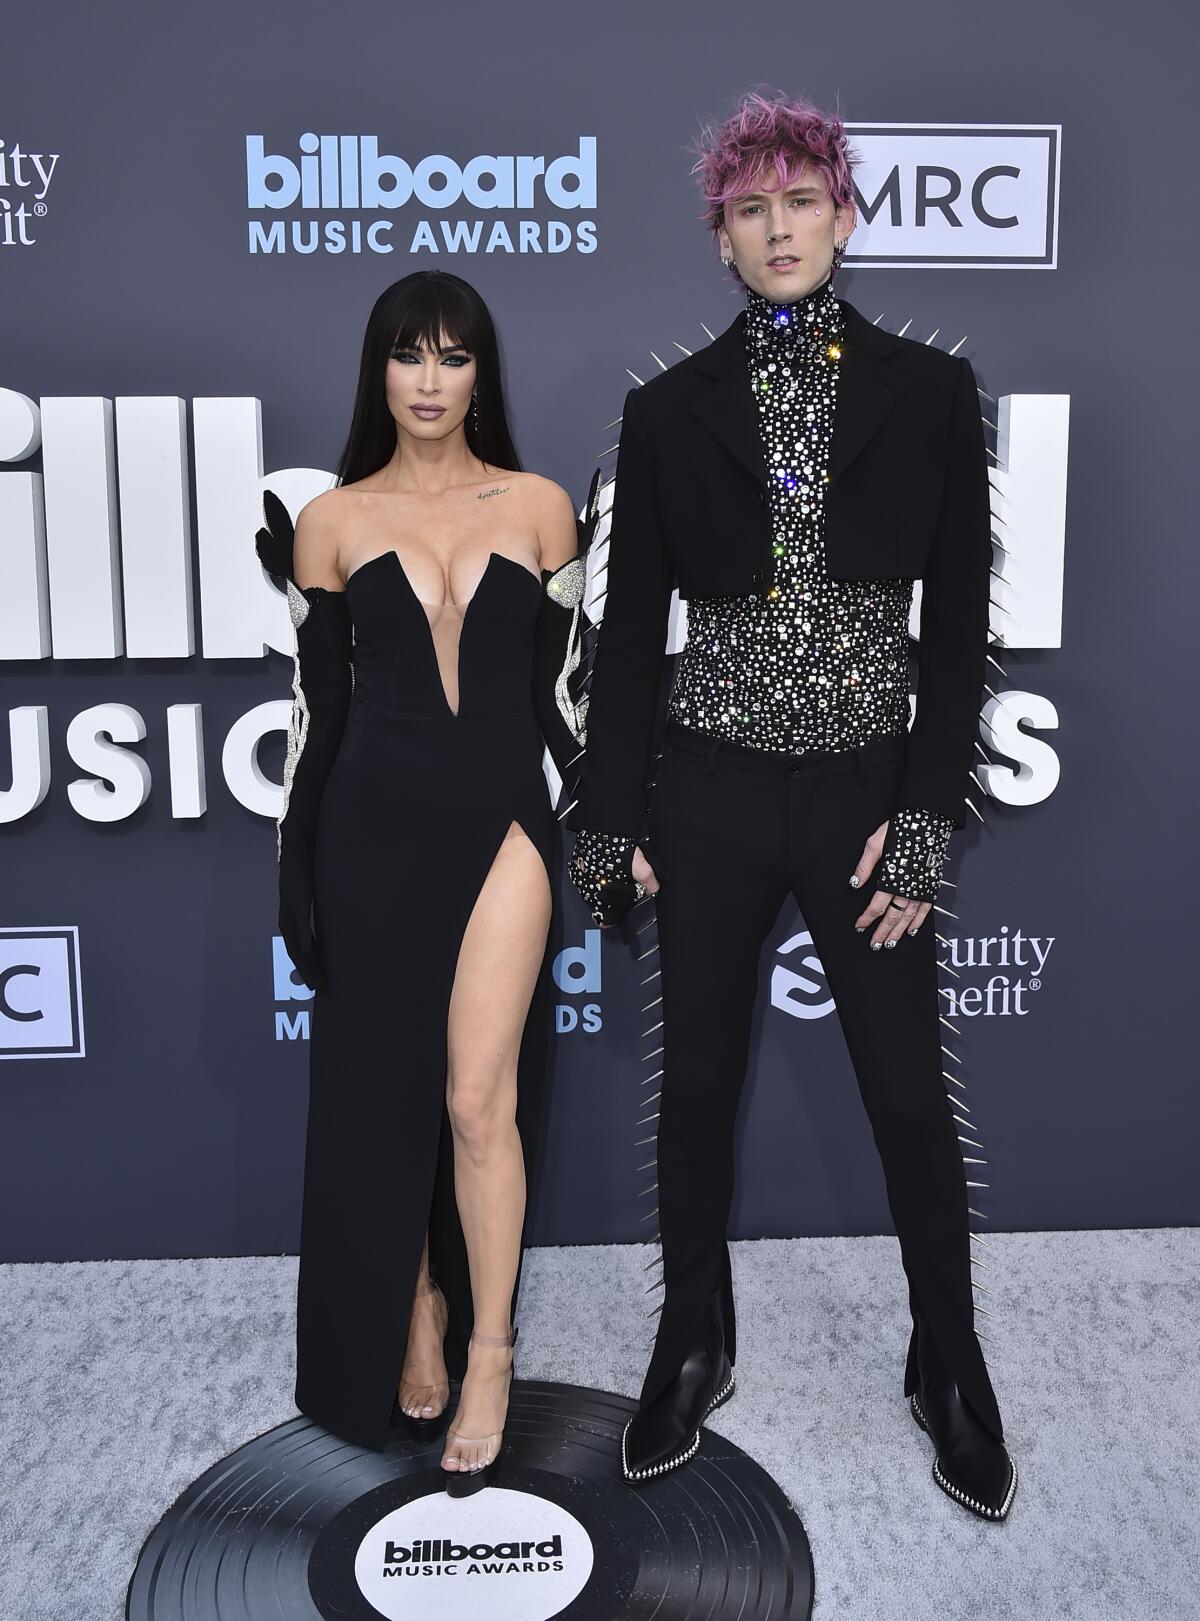 Megan Fox in a black gown and musician Machine Gun Kelly in a spikey black suit pose for cameras on a gray carpet